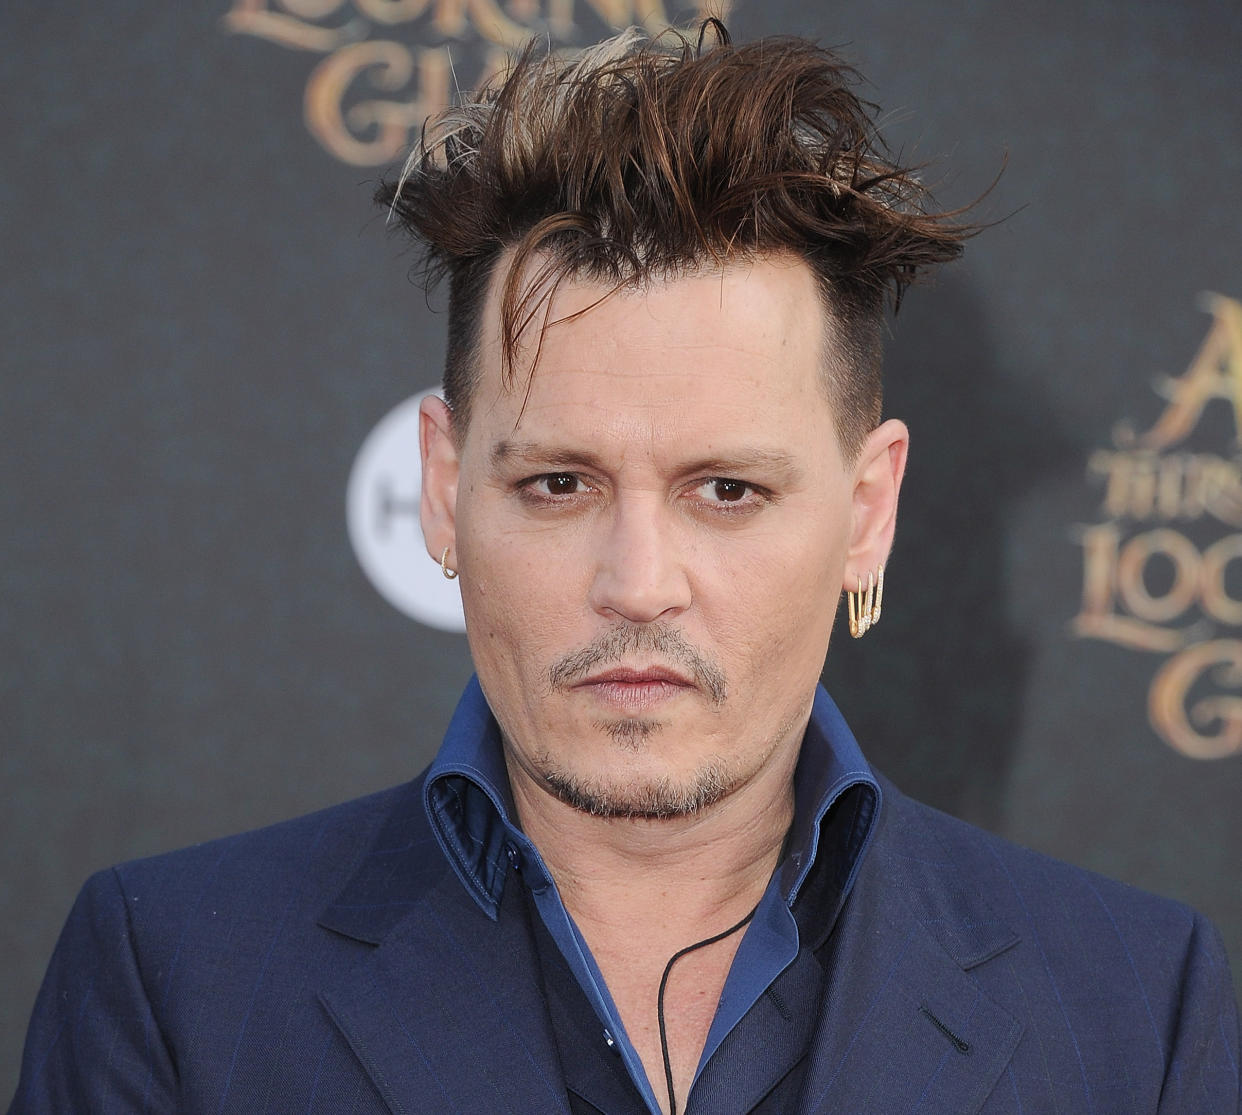 Here’s how J.K. Rowling feels about Johnny Depp being cast in “Fantastic Beasts”